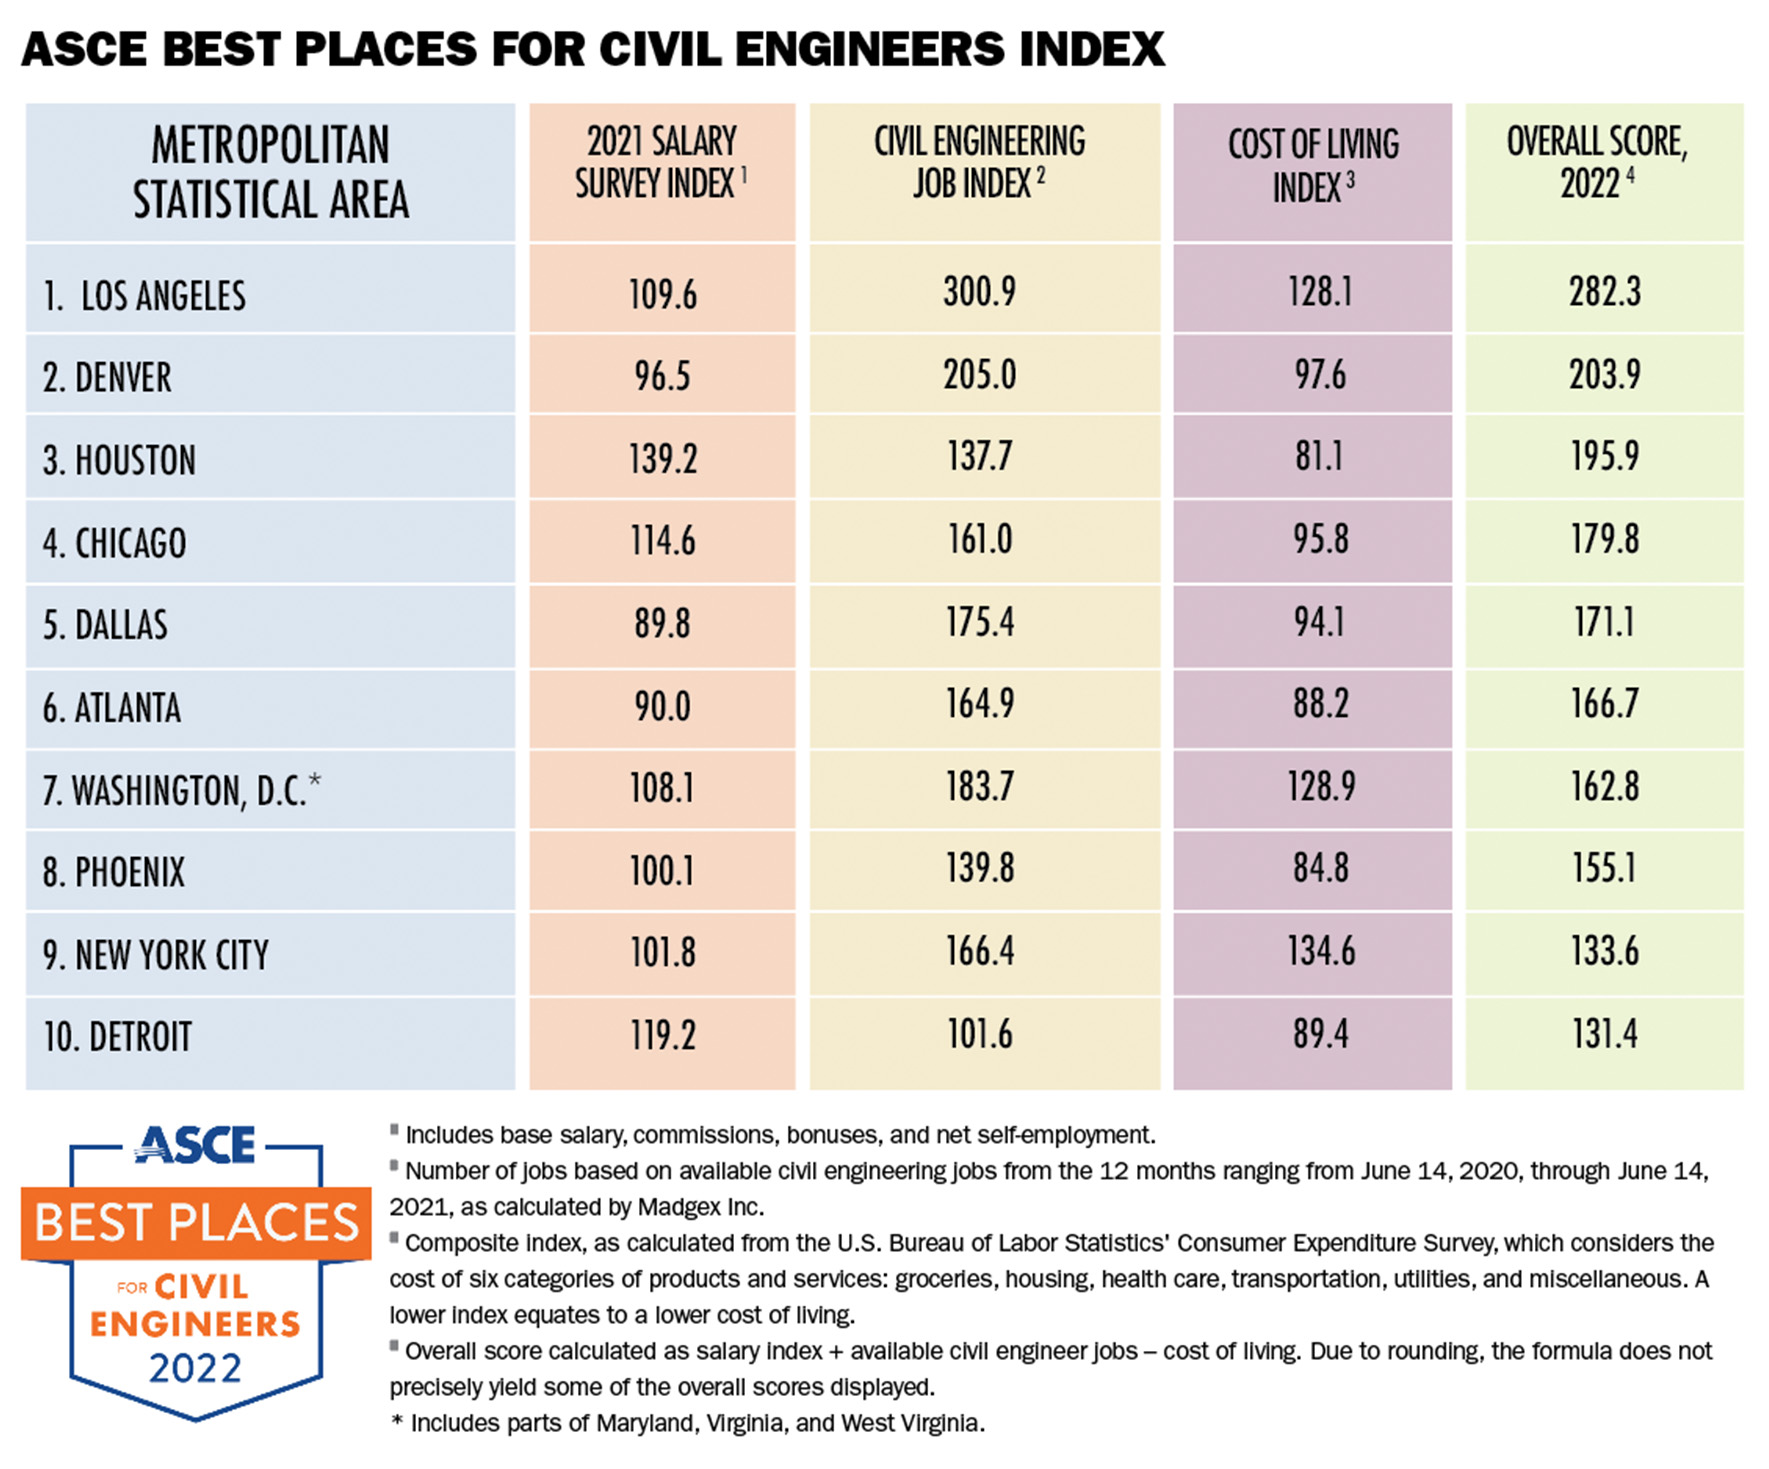 chart showing the ten best places for civil engineers in the US in 2021 in 